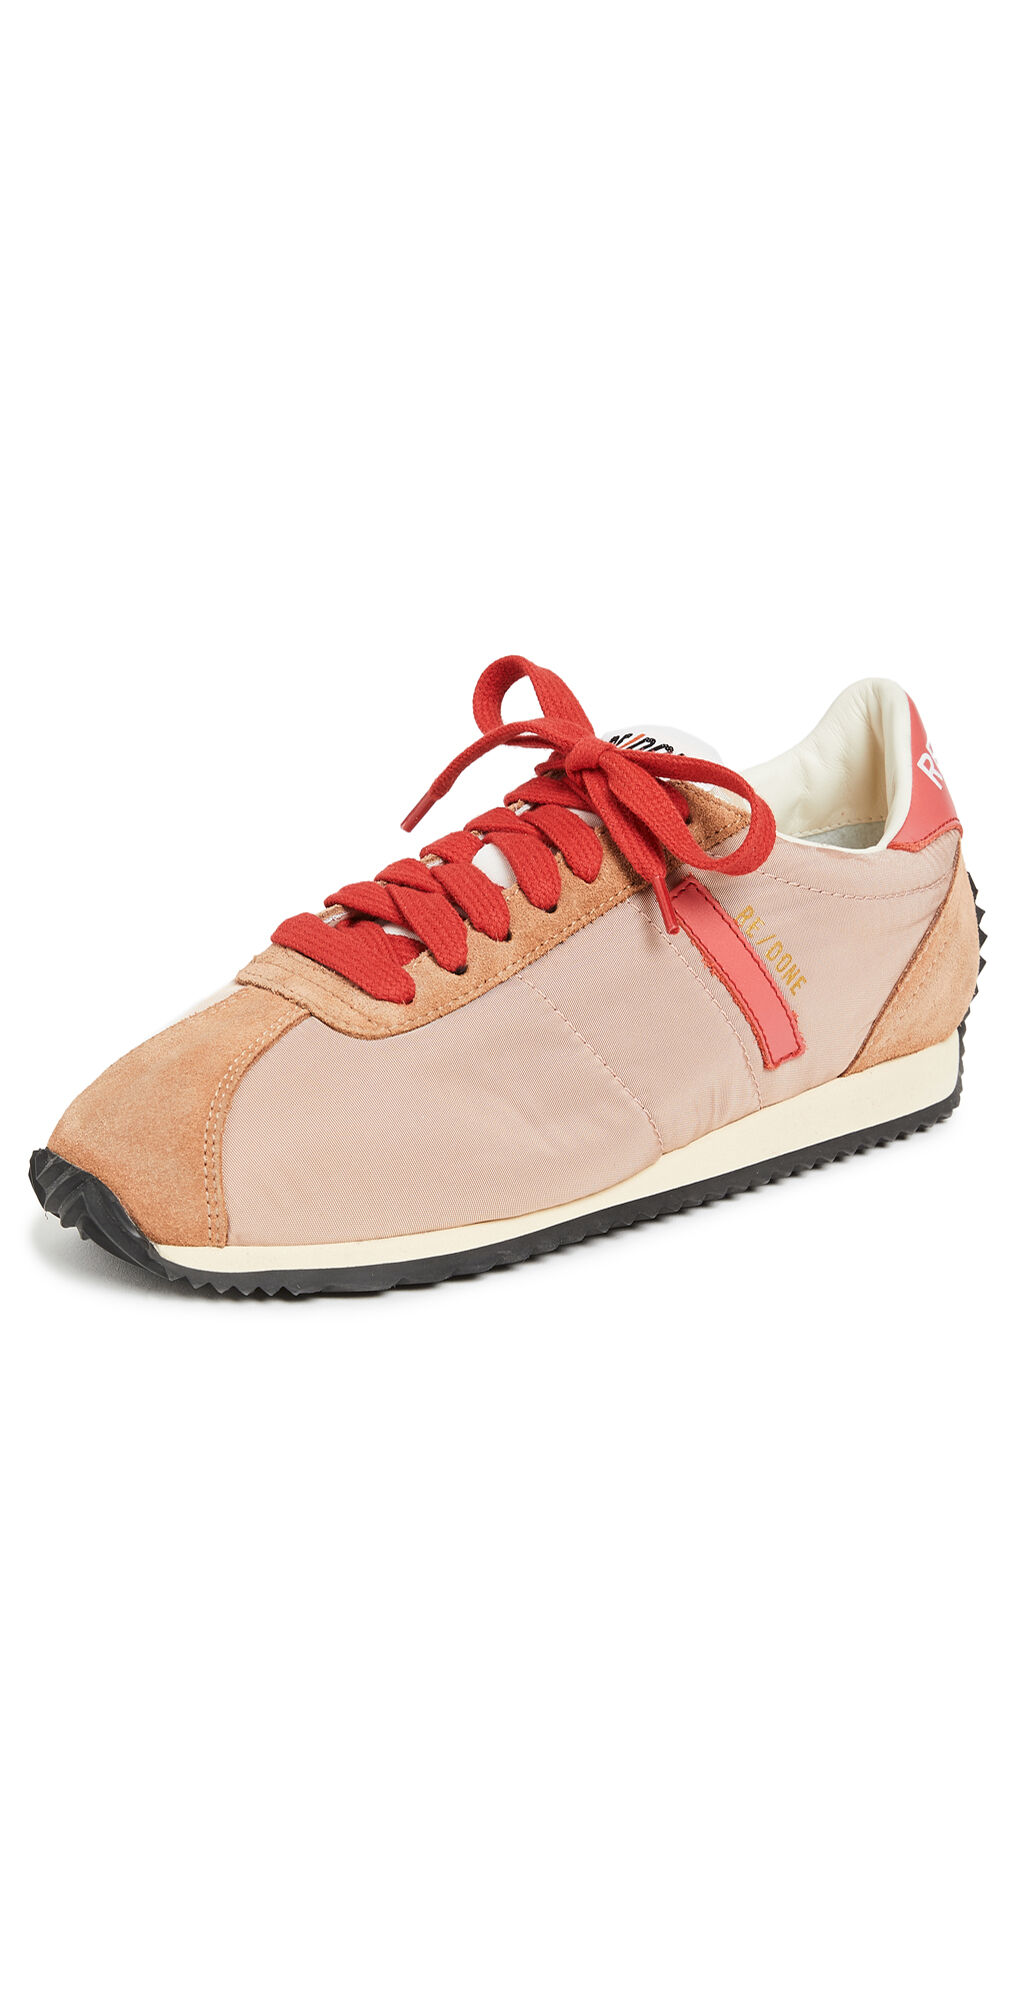 RE/DONE 70s Runner Sneakers Tan/Red 36  Tan/Red  size:36